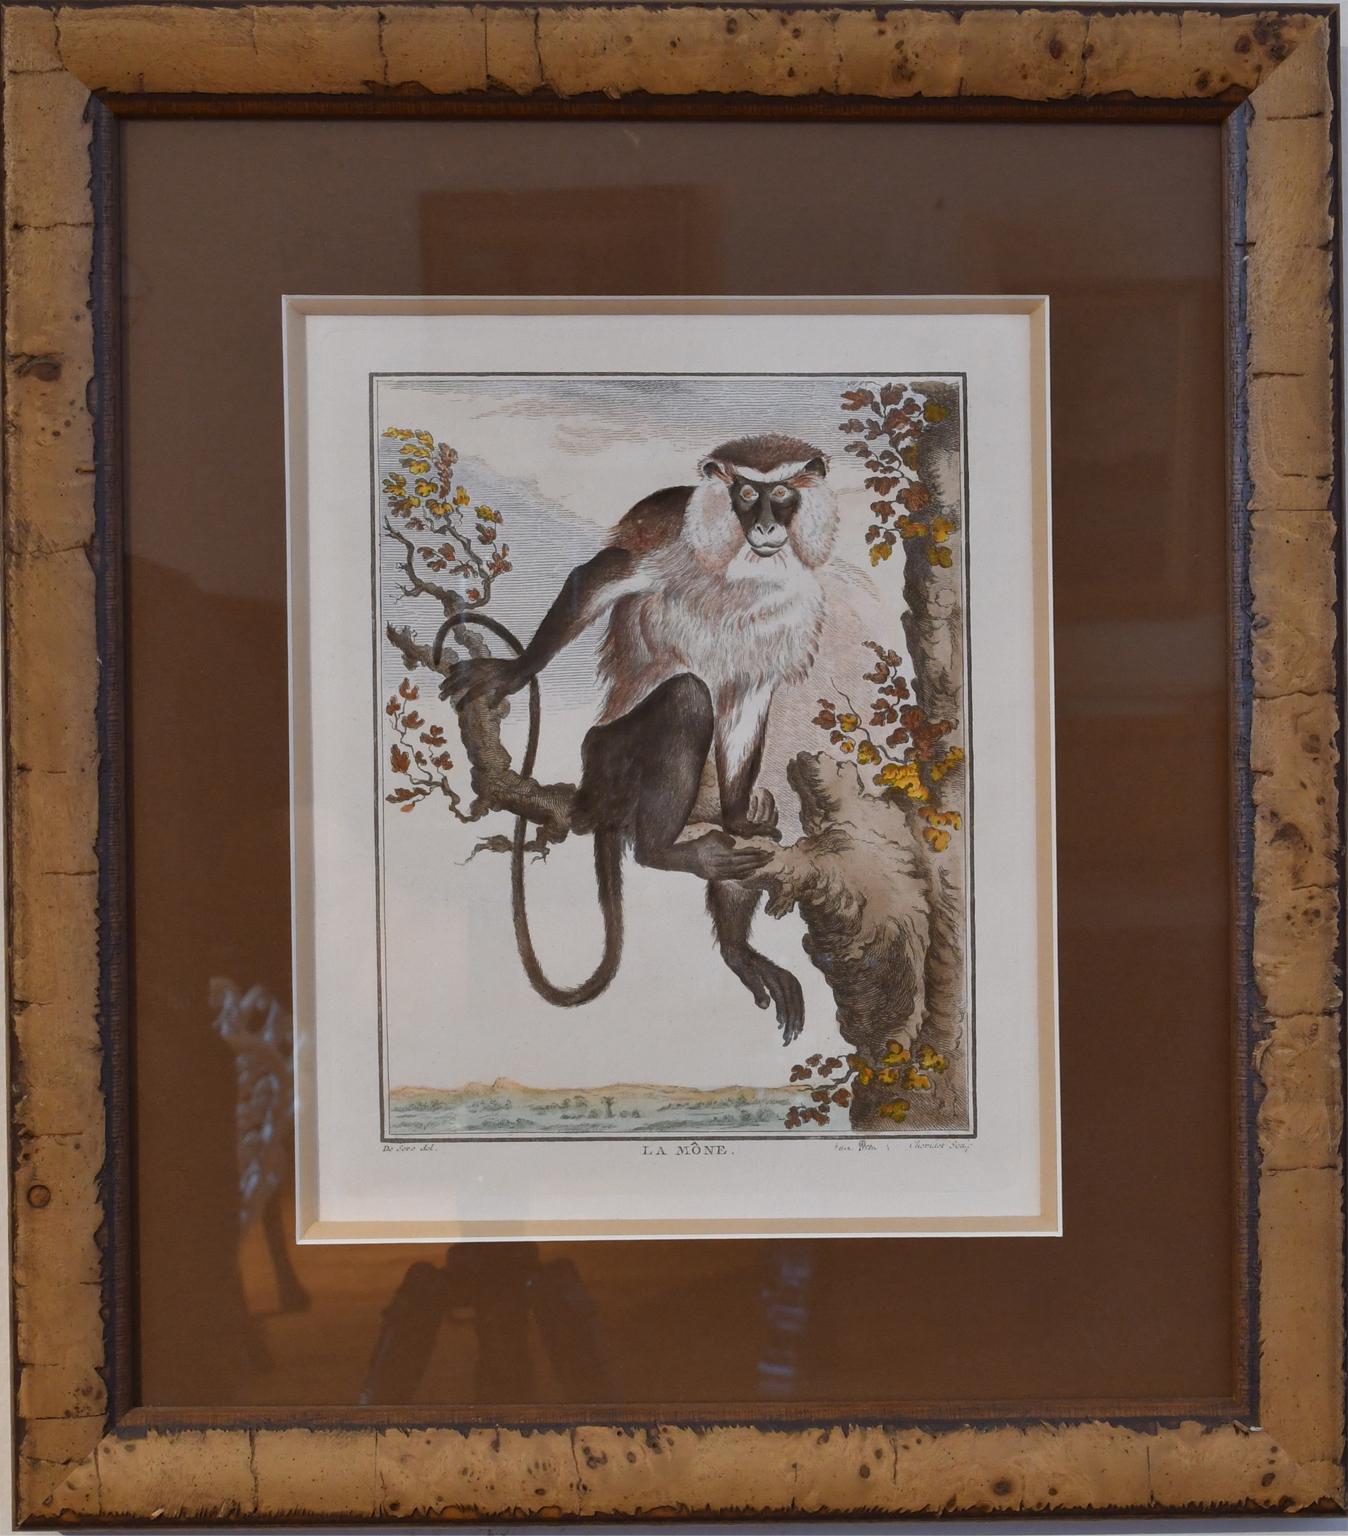 French Set of 4 Framed 18th Century Hand-Colored Engravings of Monkeys by G. Buffon For Sale